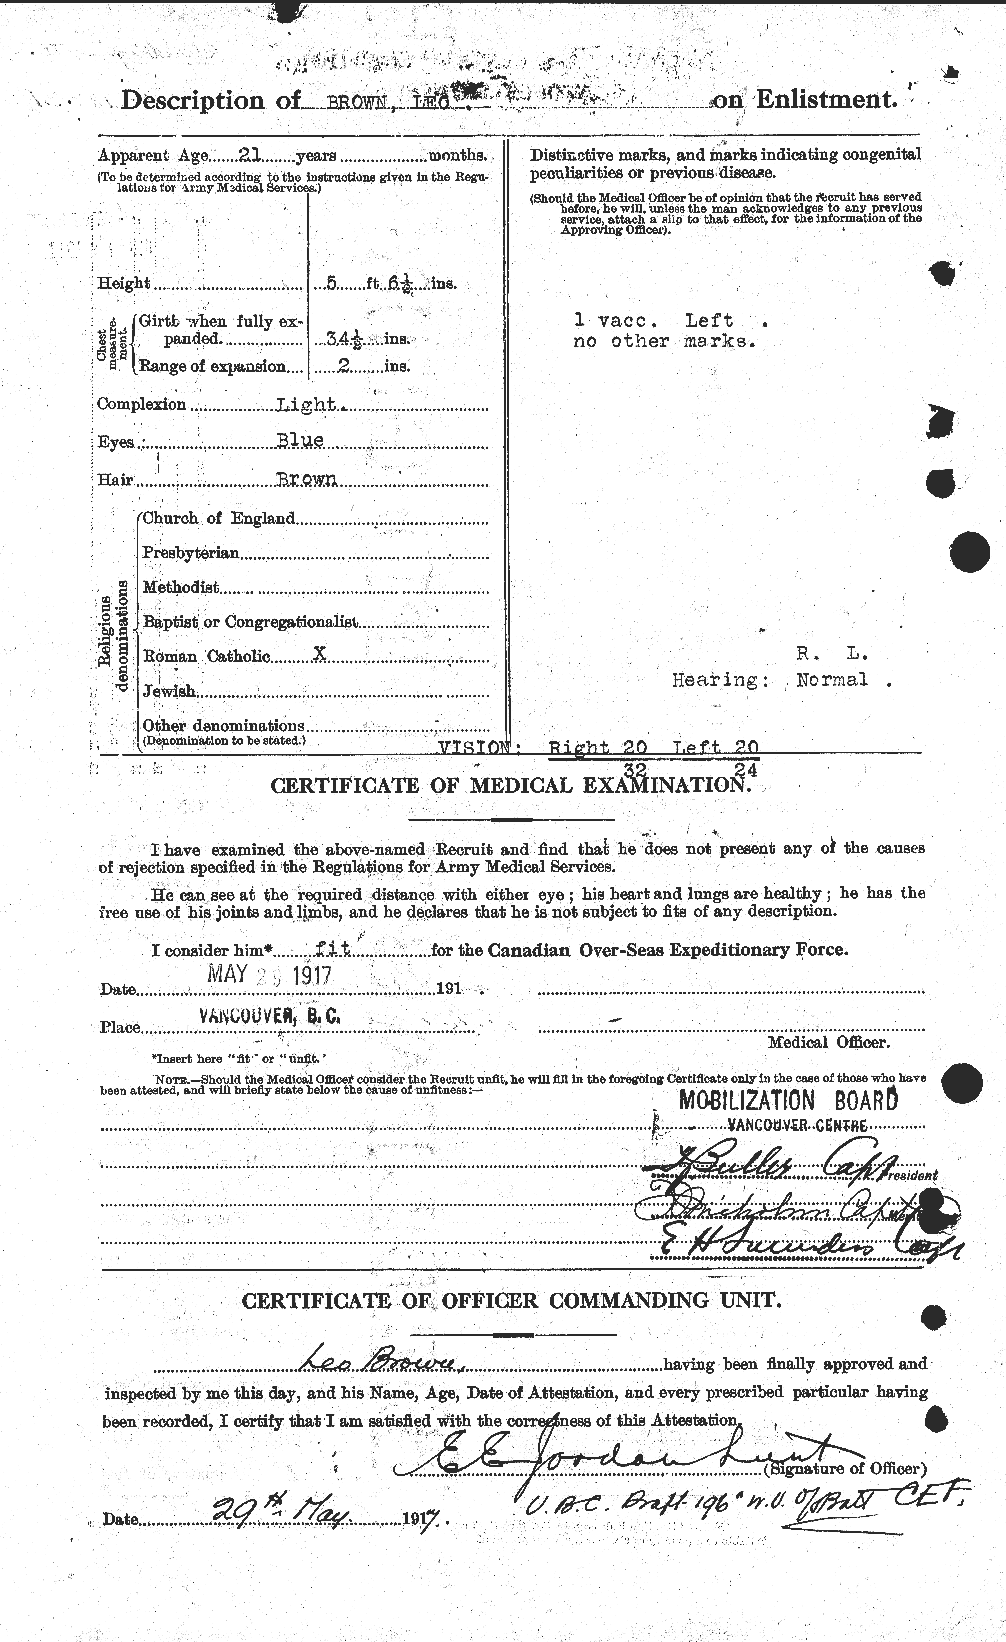 Personnel Records of the First World War - CEF 266281b